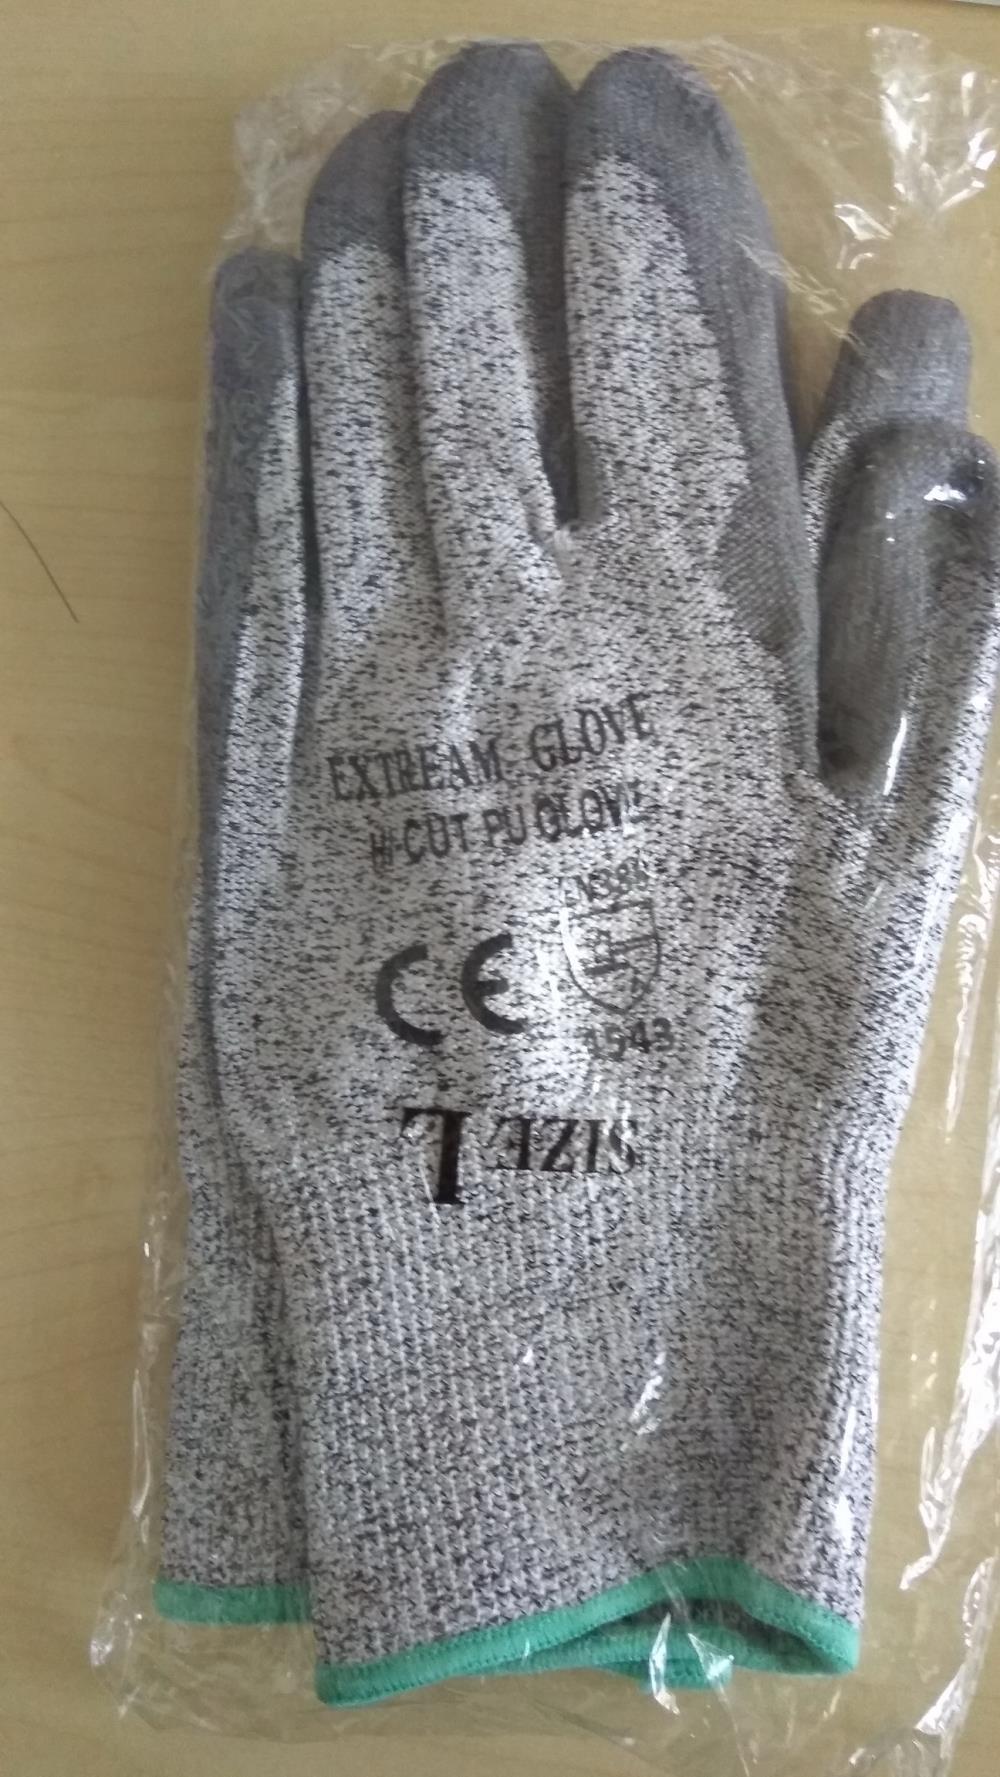 EXTREAM GLOVE ถุงมือกันบาด HI-CUT PU GLOVE,ถุงมือกันบาด,EXTREAM GLOVE,Plant and Facility Equipment/Safety Equipment/Gloves & Hand Protection